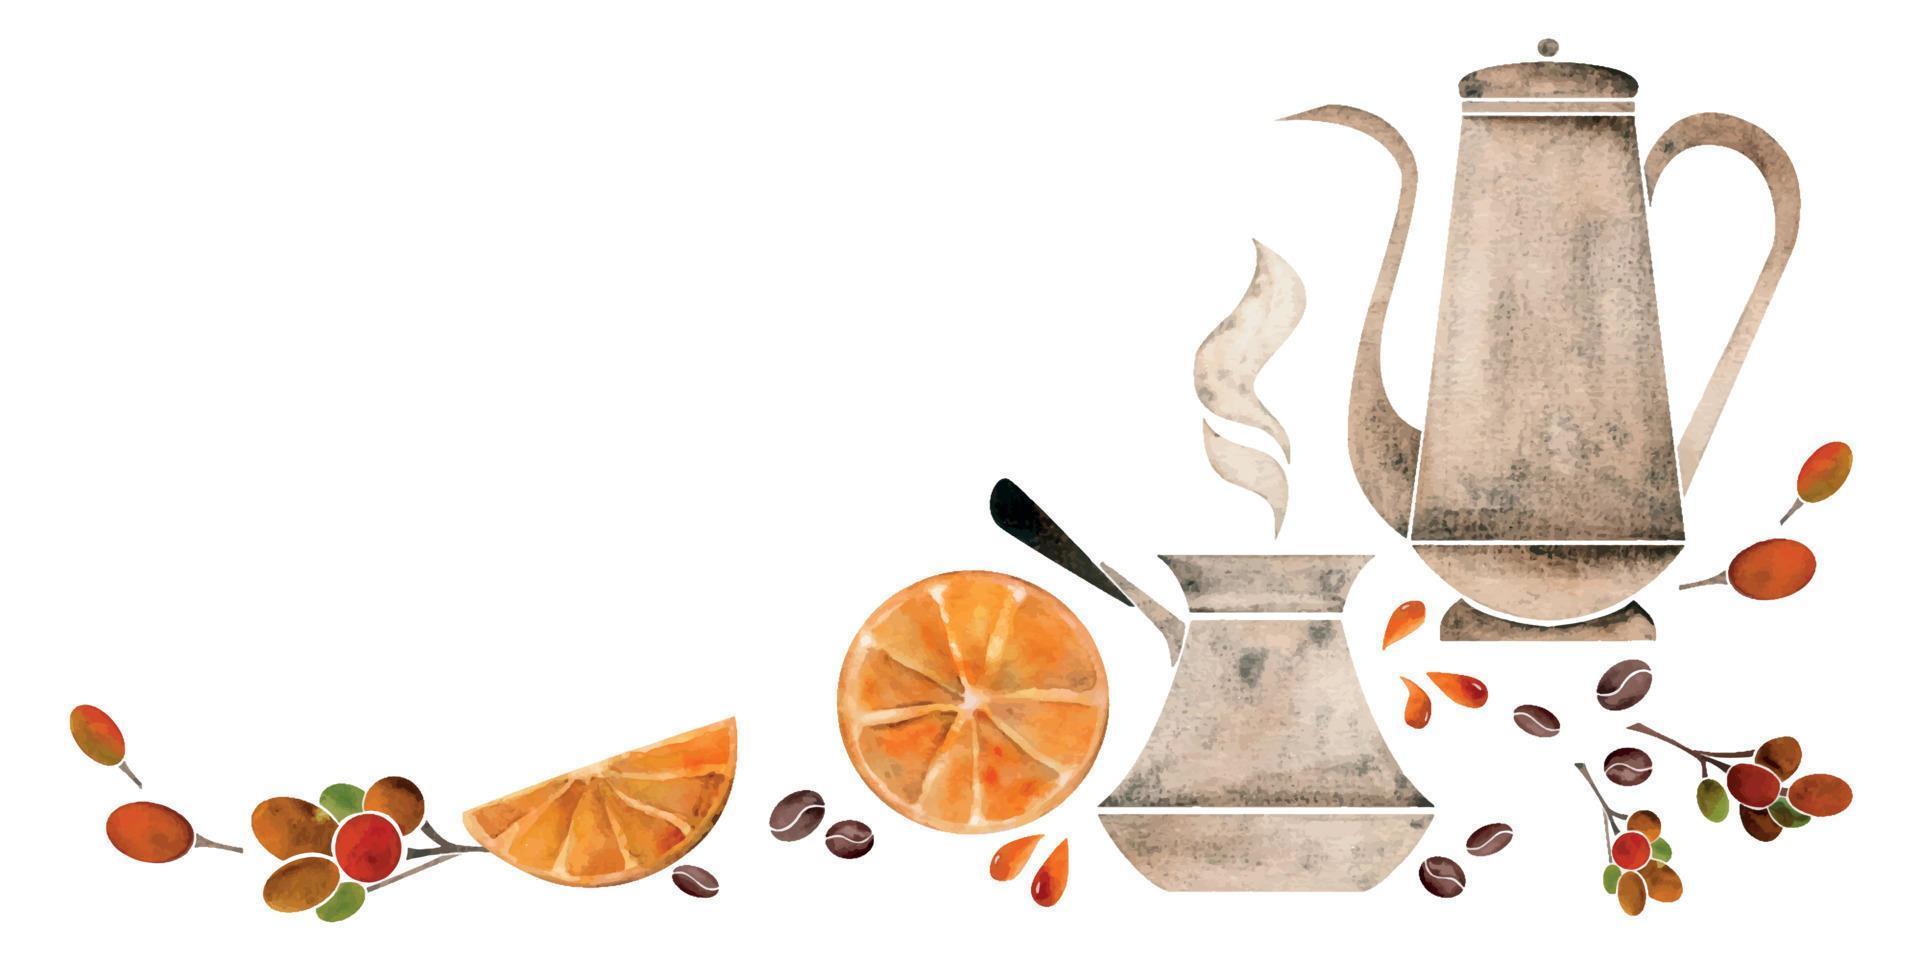 Watercolor hand drawn composition with copper coffee pot, cezve, beans, orange slices, cinnamon sticks. Isolated on white background. For invitations, cafe, restaurant food menu, print, website, cards vector